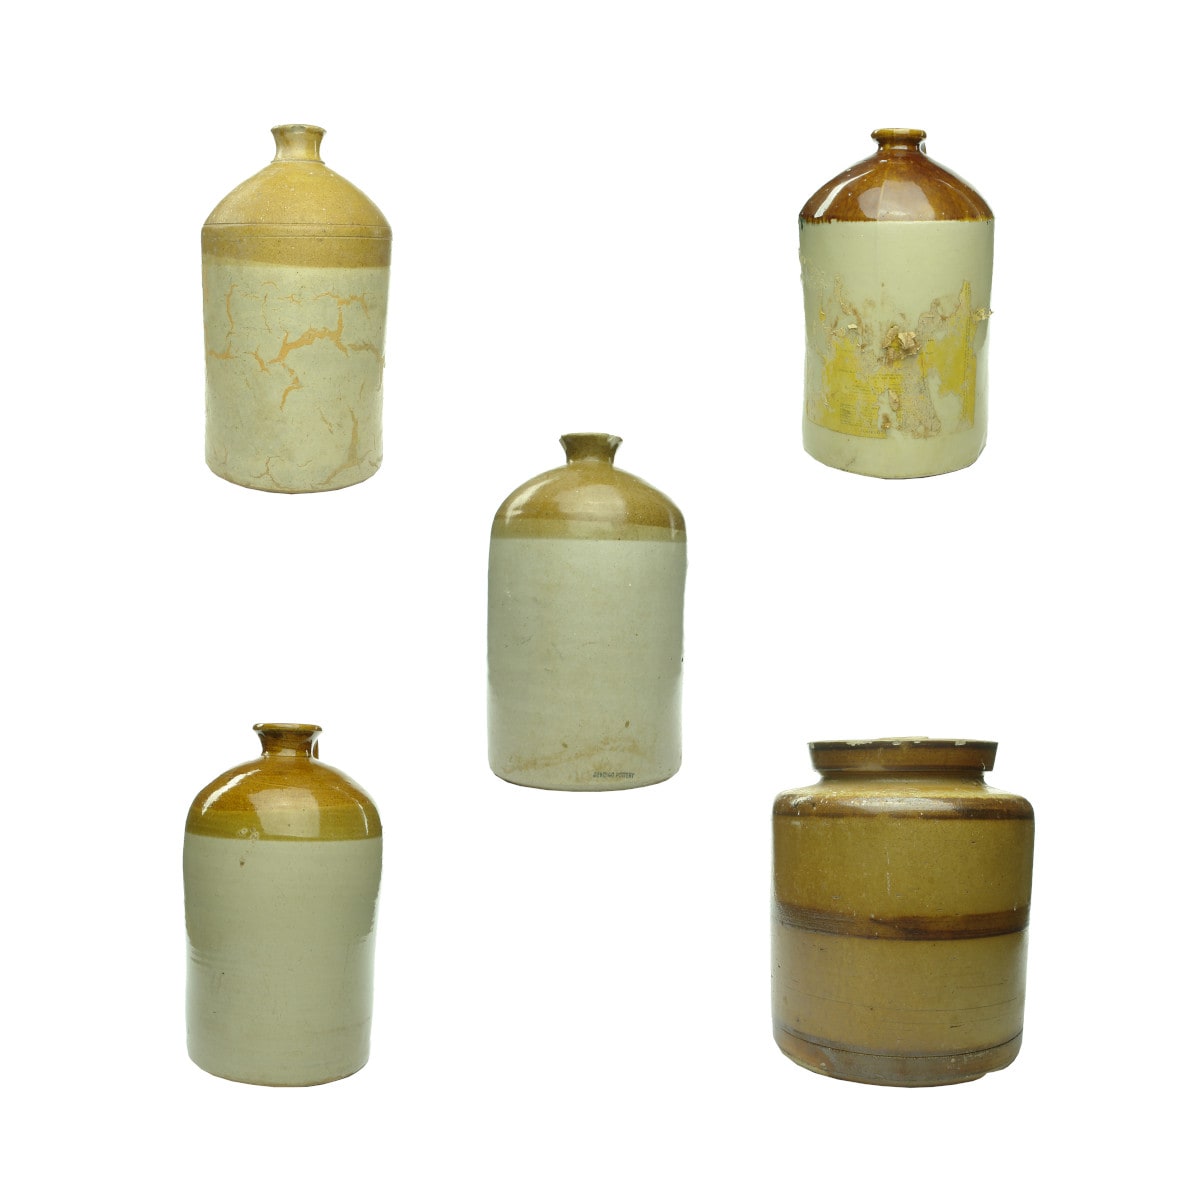 Five large Plain Demijohns/Jar. Bendigo Pottery and unstamped. (NOT FOR POST, PICKUP ONLY)